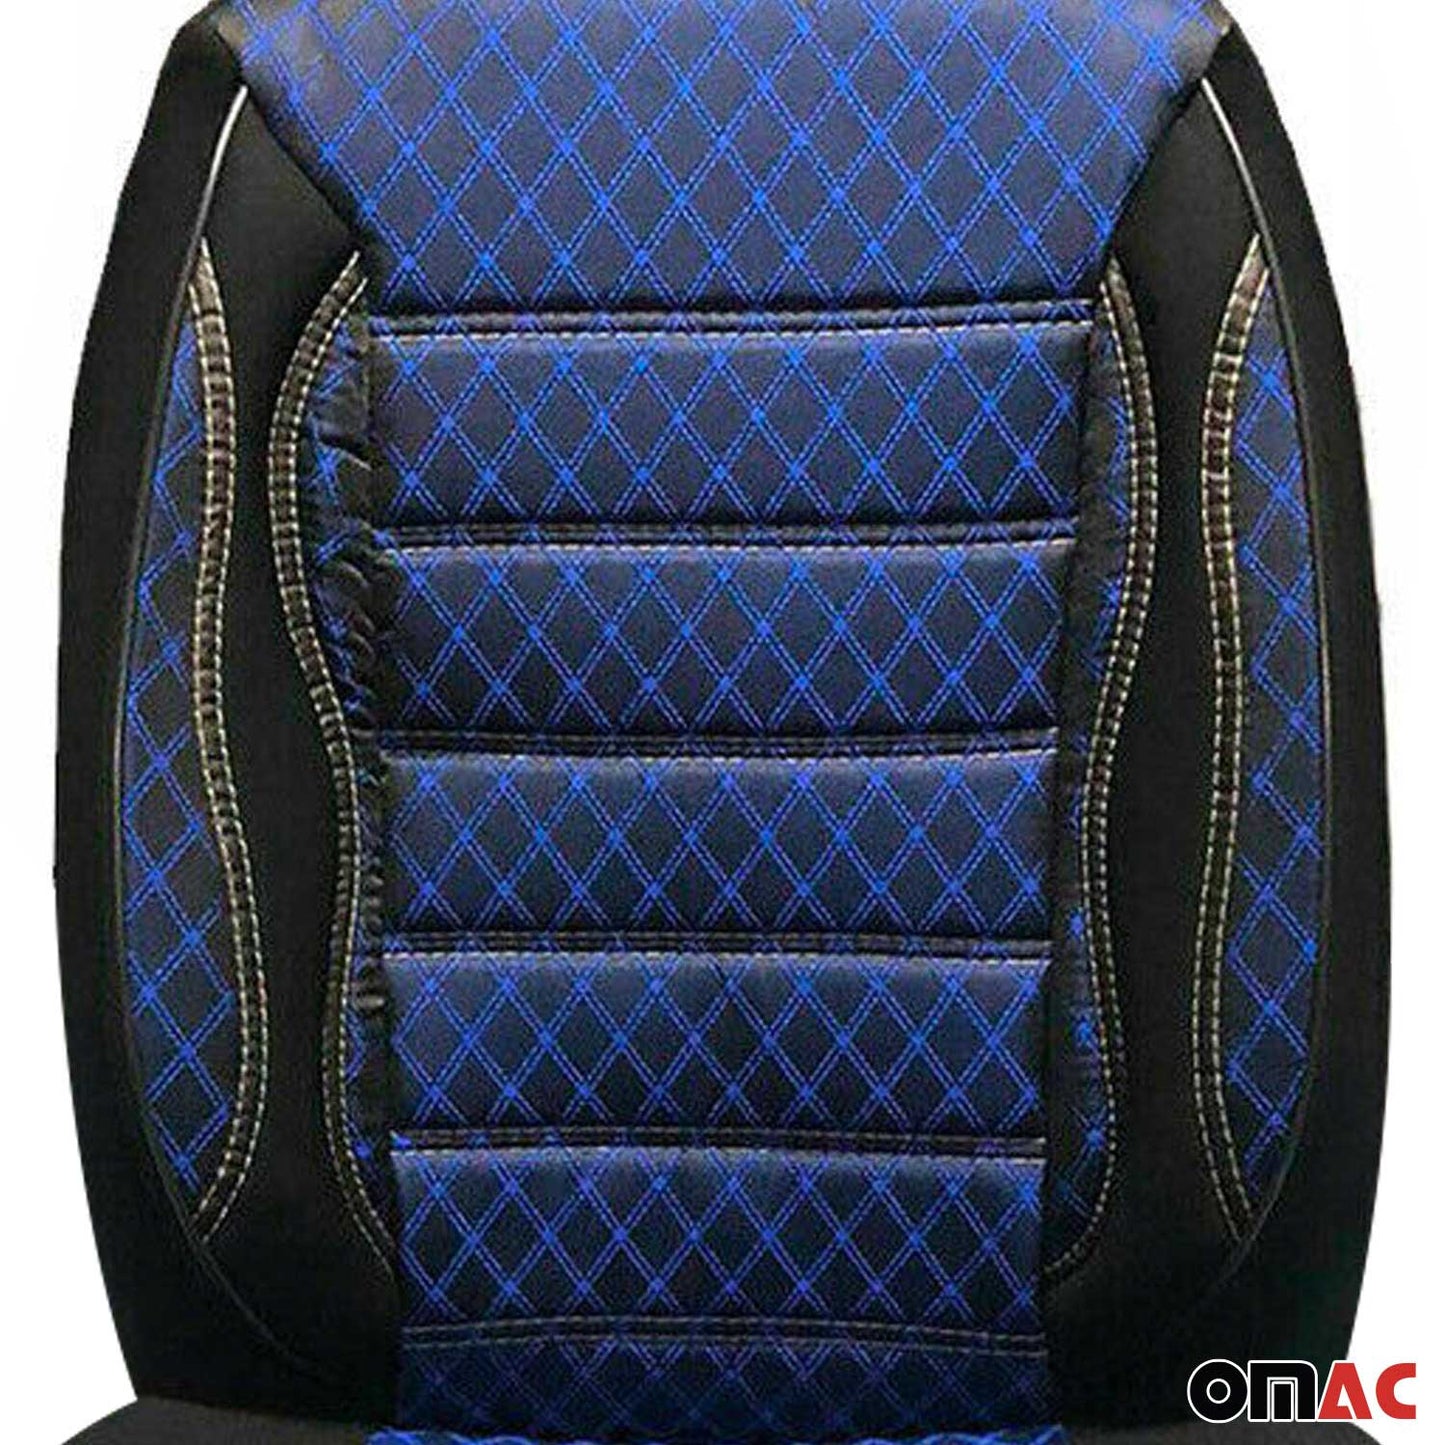 OMAC Front Car Seat Covers Protector for VW Eurovan 1993-2003 Black & Blue 2+1 A012047